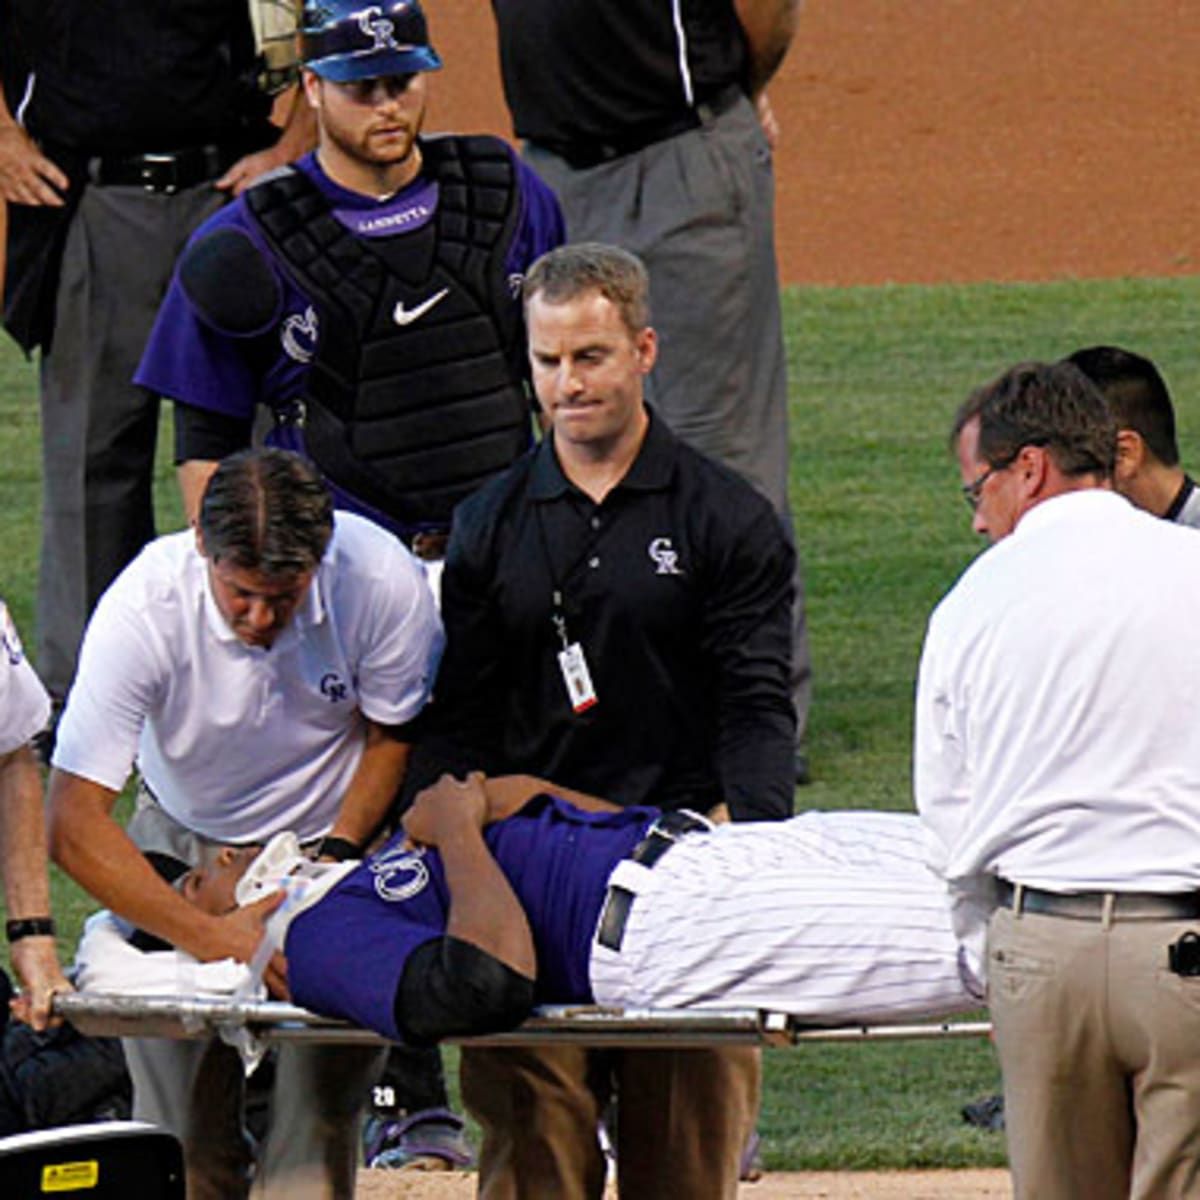 Rockies pitcher leaves hospital after being hit by line drive